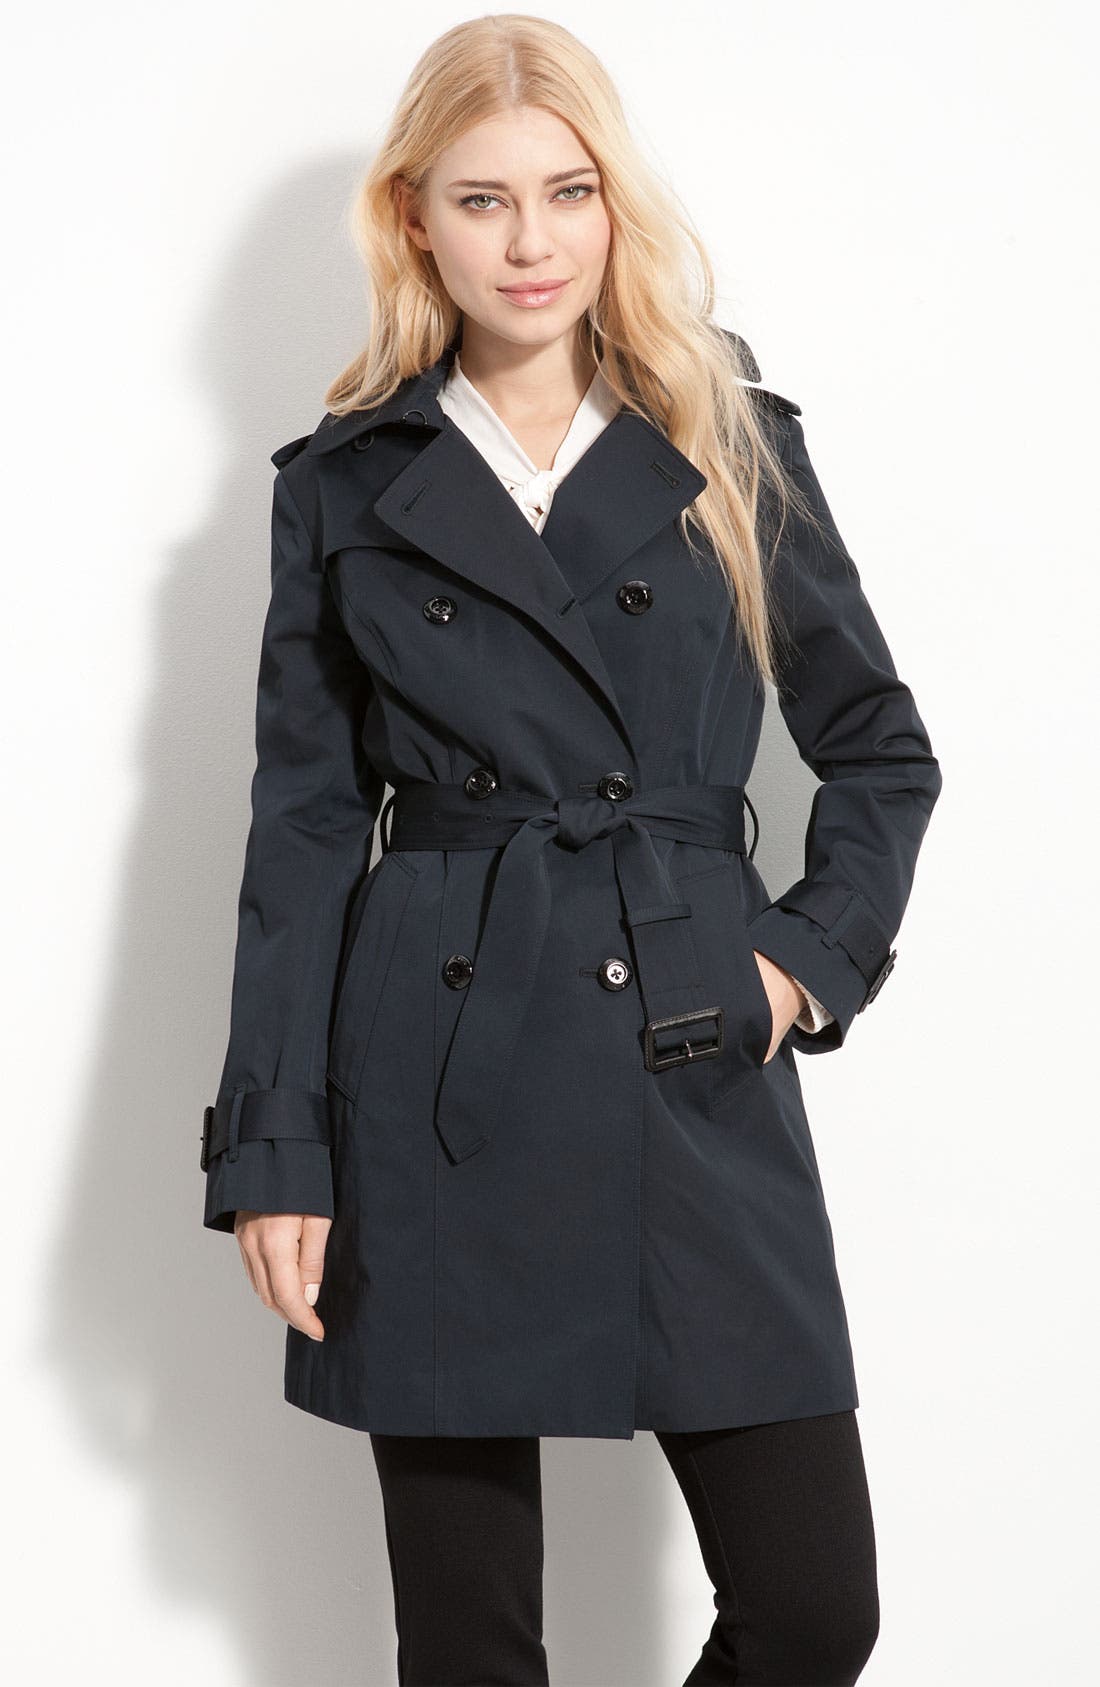 heritage trench coat with detachable liner